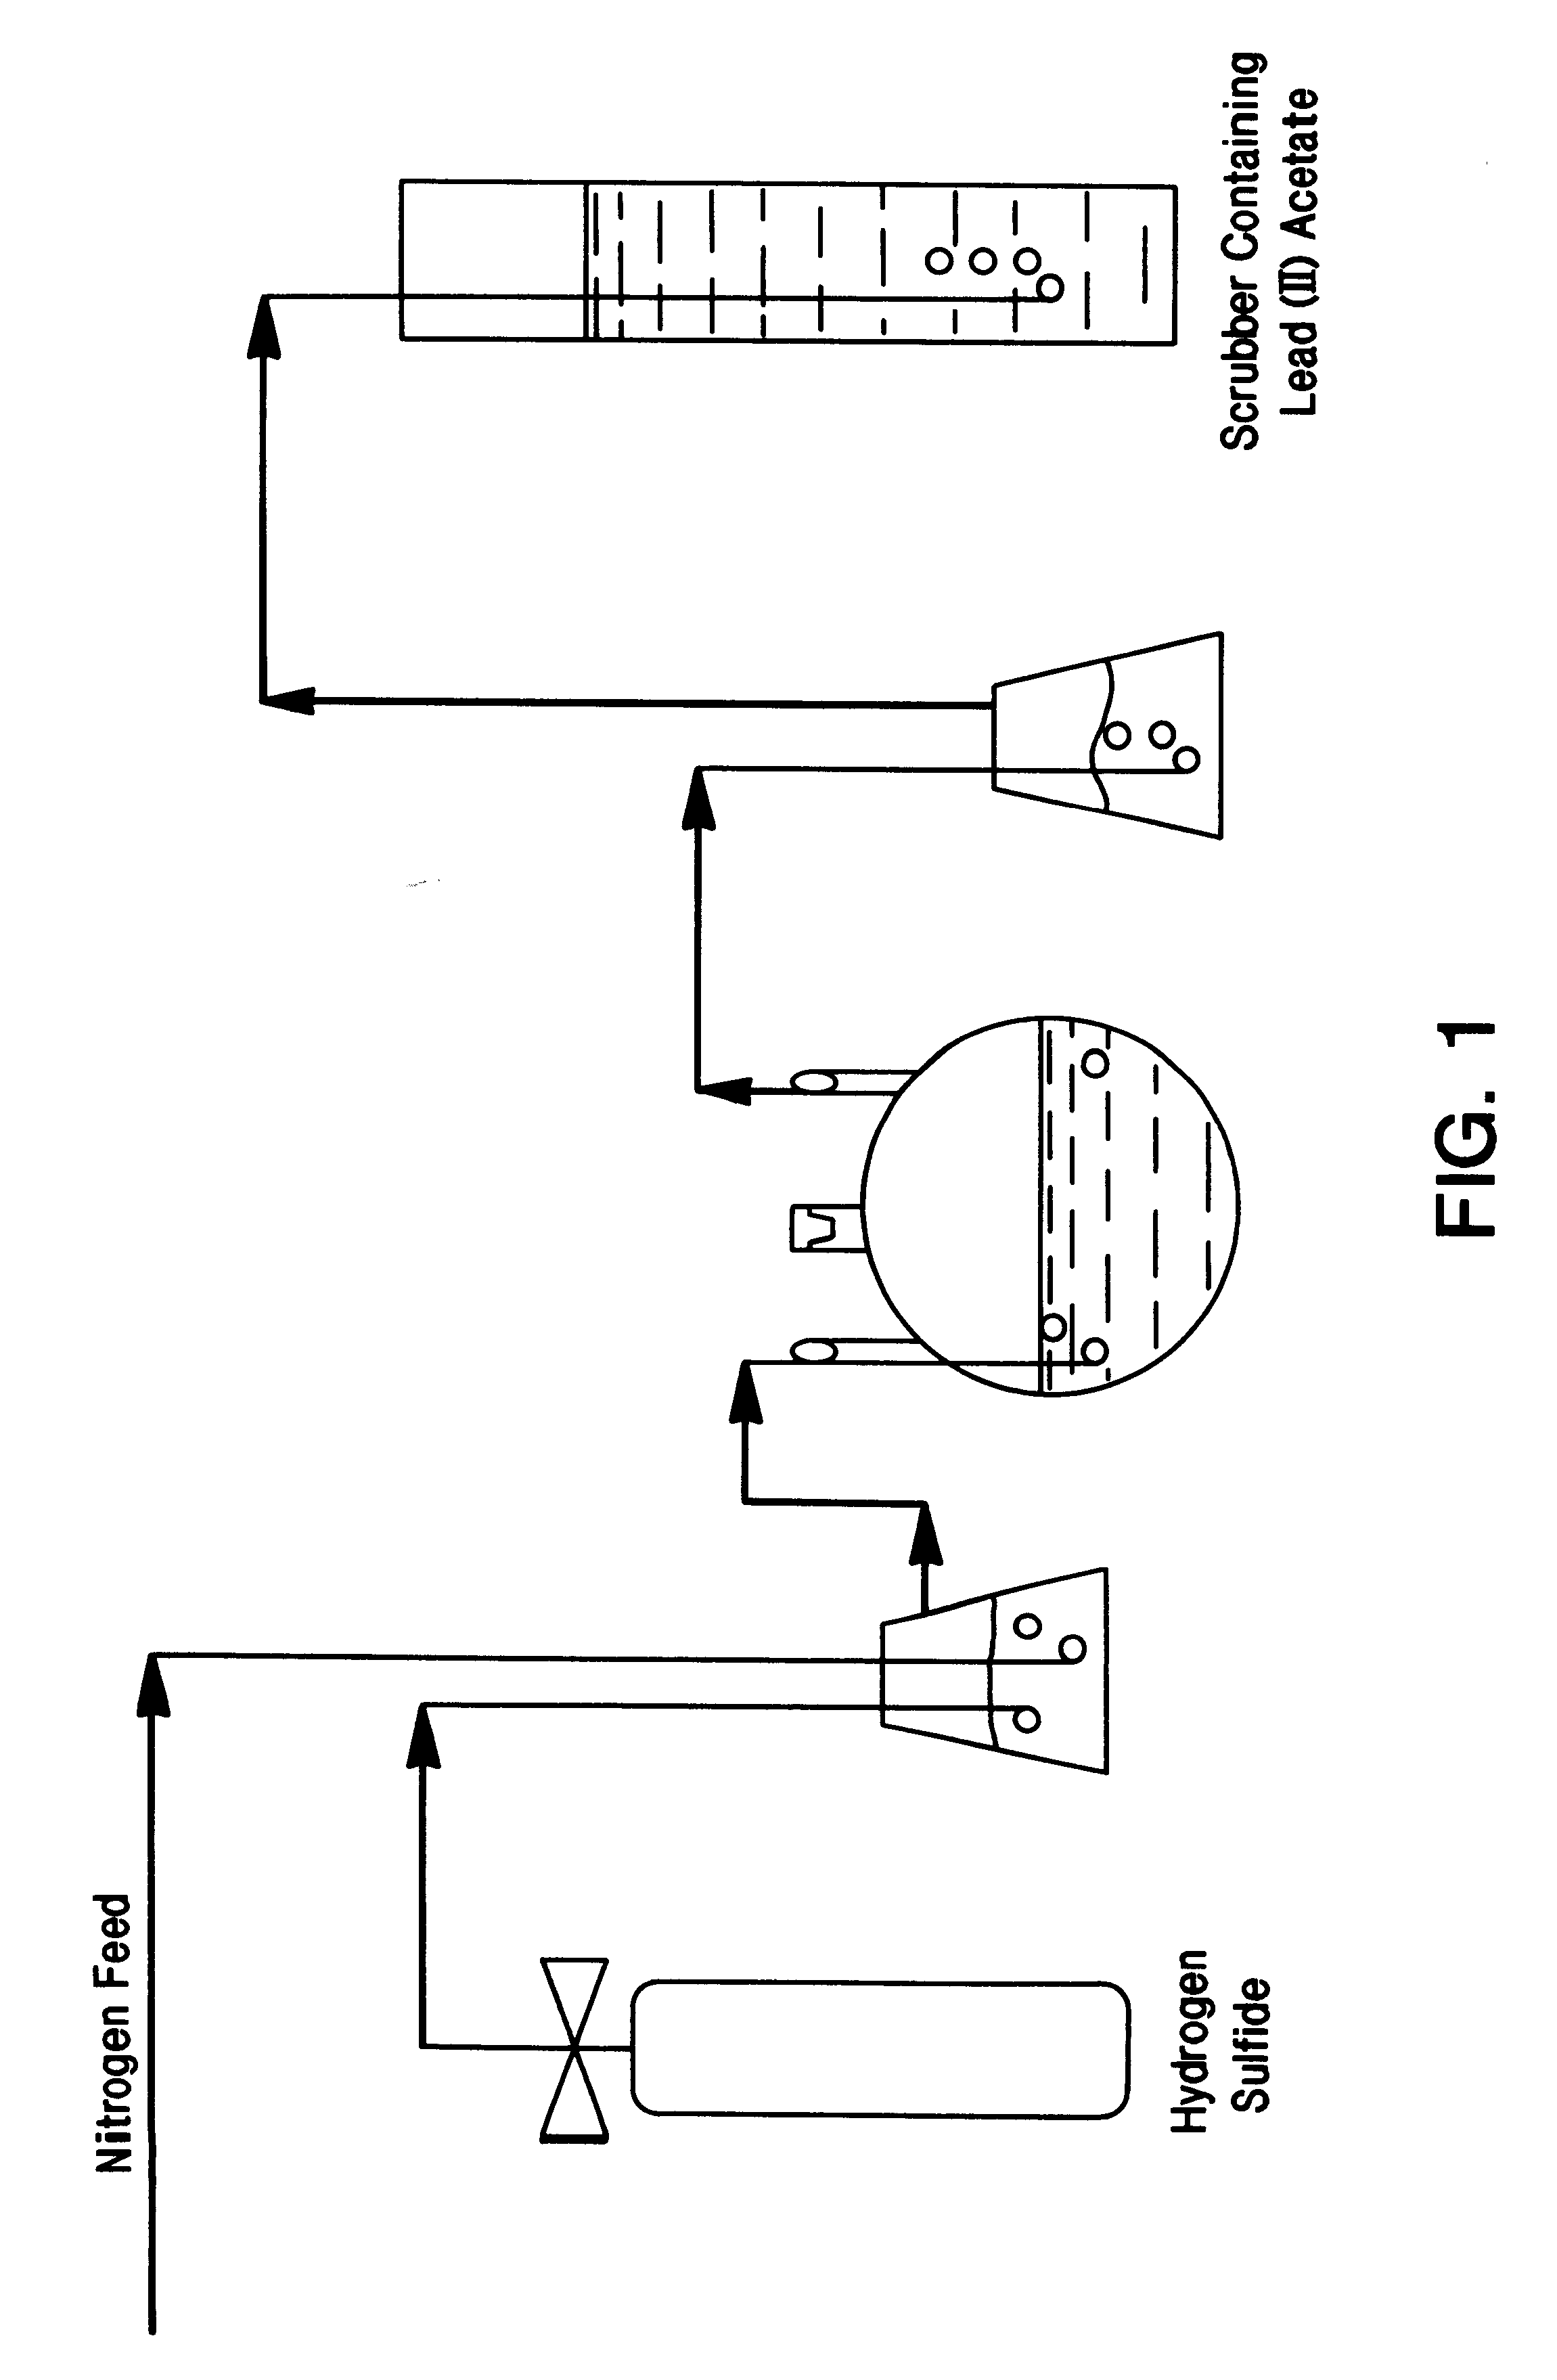 Process for the electrolysis of technical-grade hydrochloric acid contaminated with organic substances using oxygen-consuming cathodes